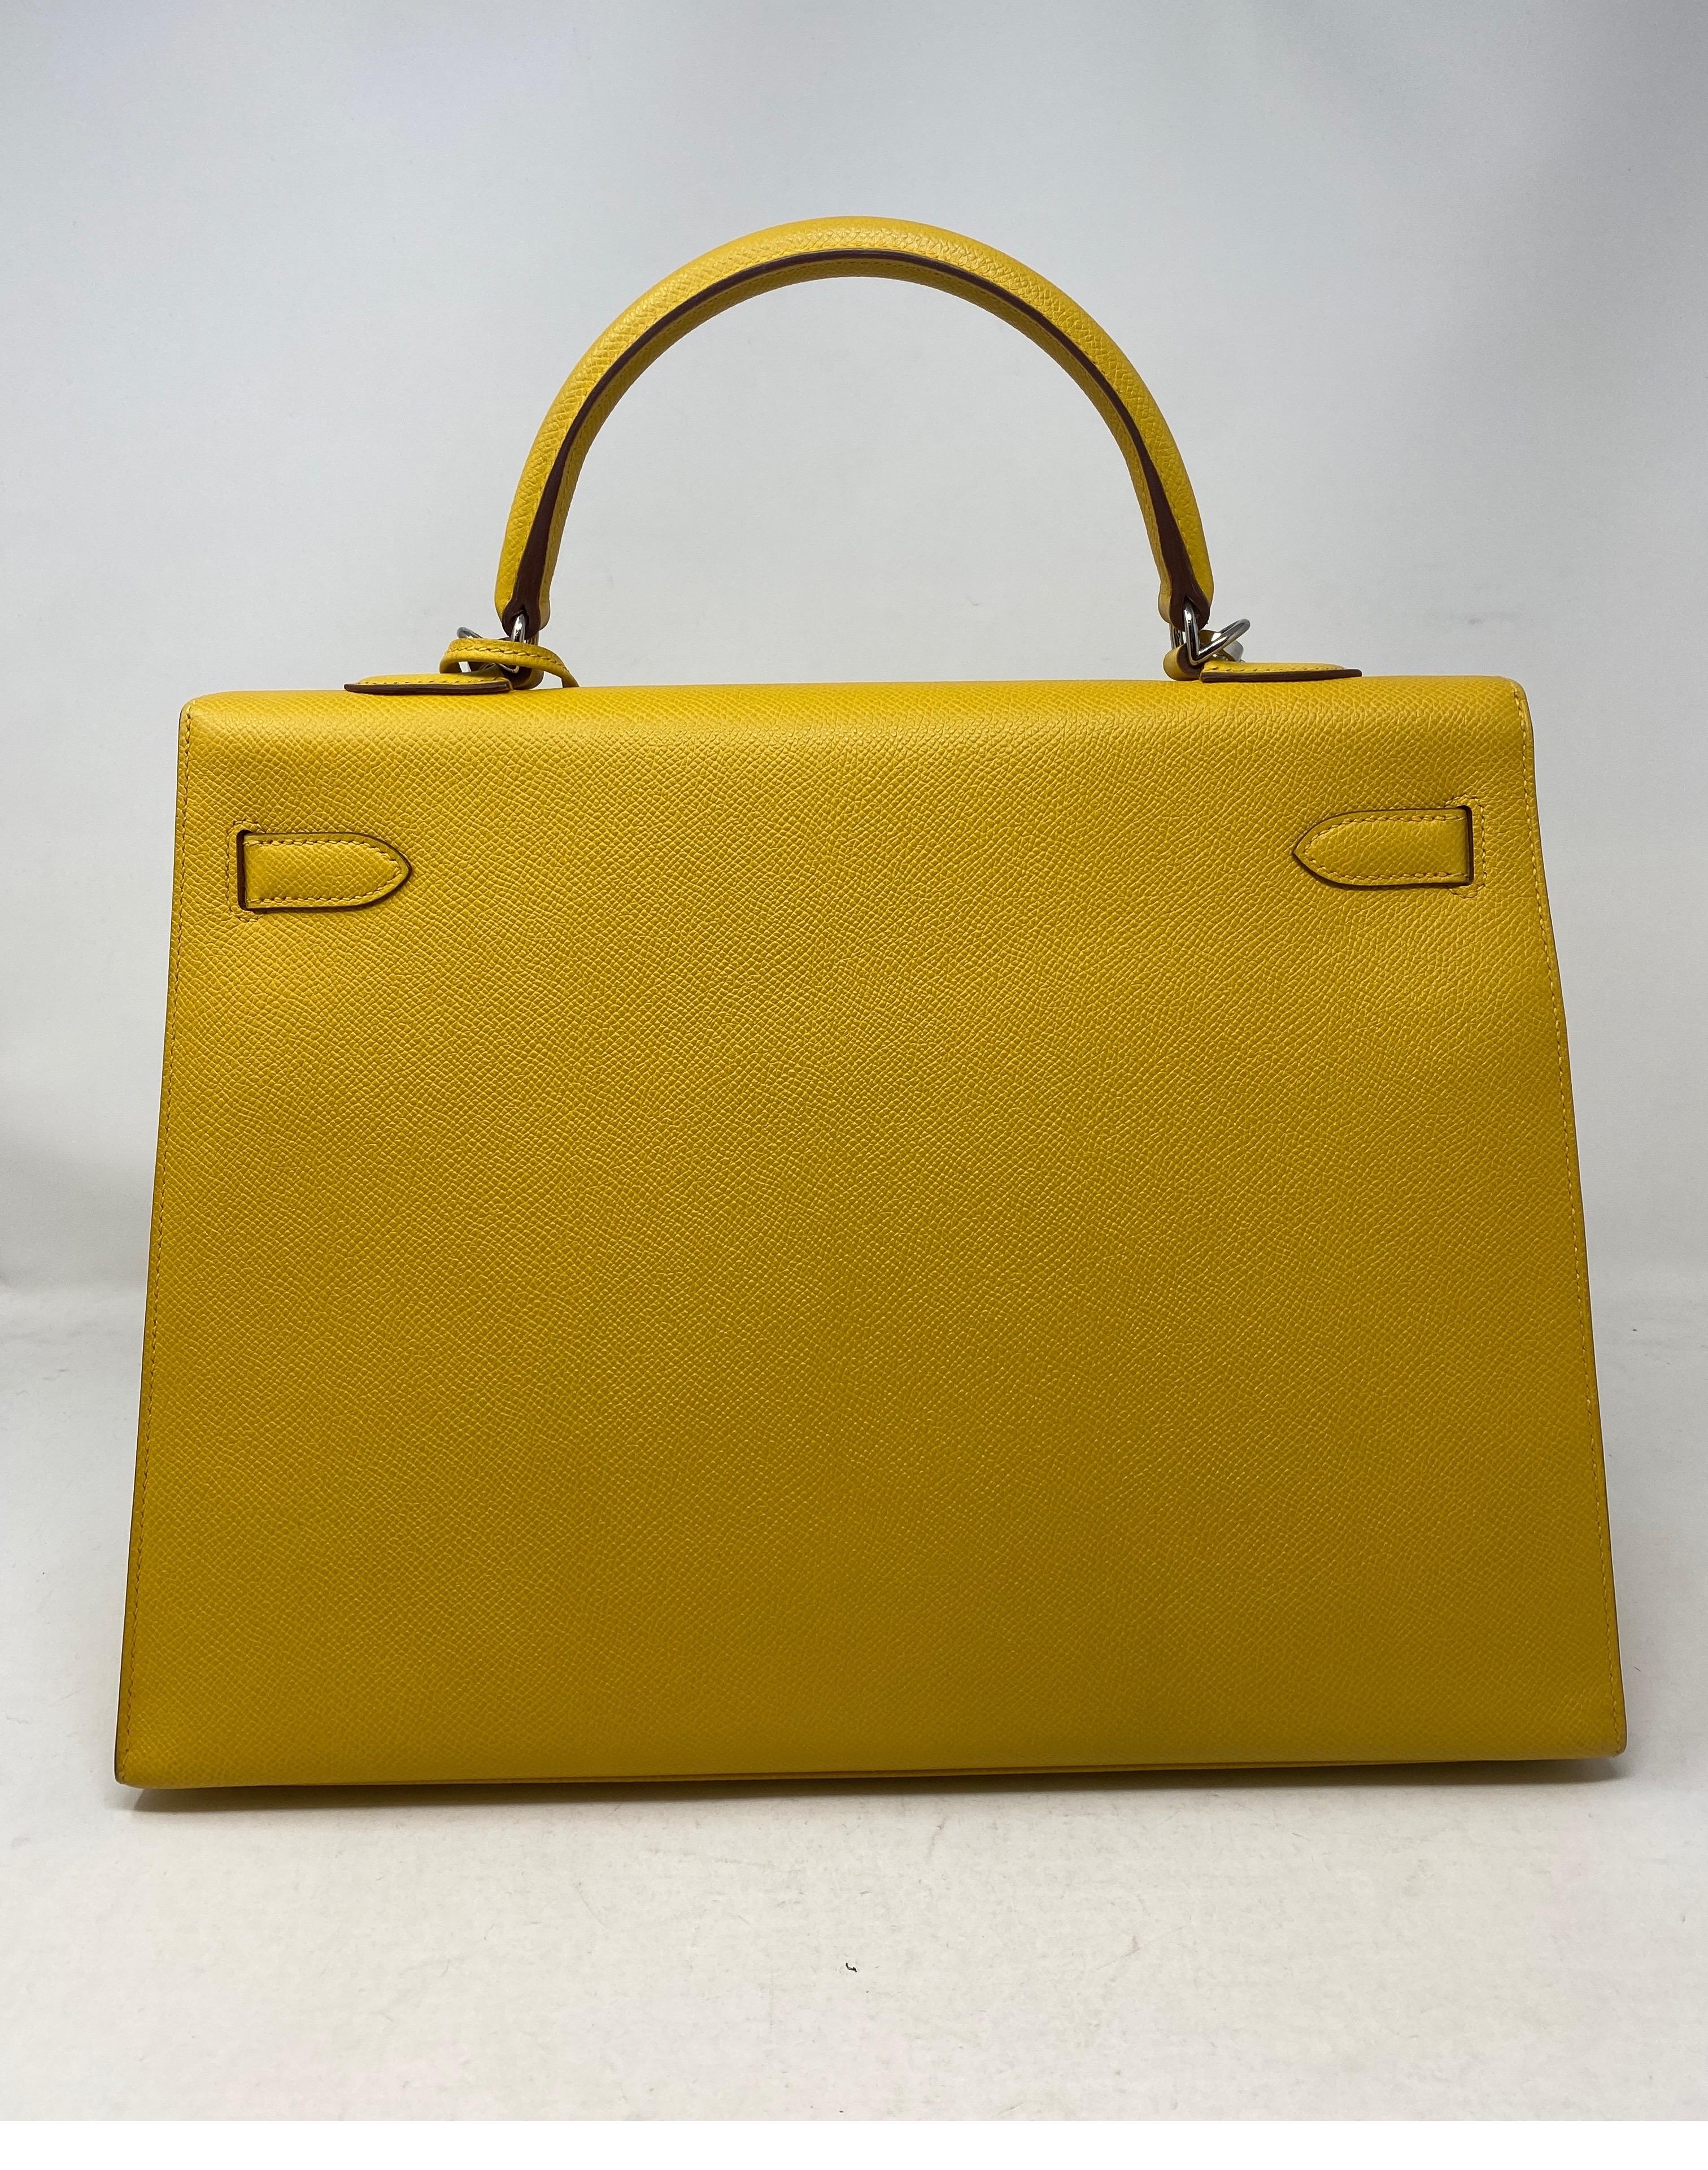 Hermès Kelly 35 Soleil Bag. Color is yellow like the sun. Veau Epsom leather and Palladium plated hardware.  Like new condition, comes with authentication from Bababebi. Sellier bag. Includes clochette, lock, keys, and dust cover. Guaranteed